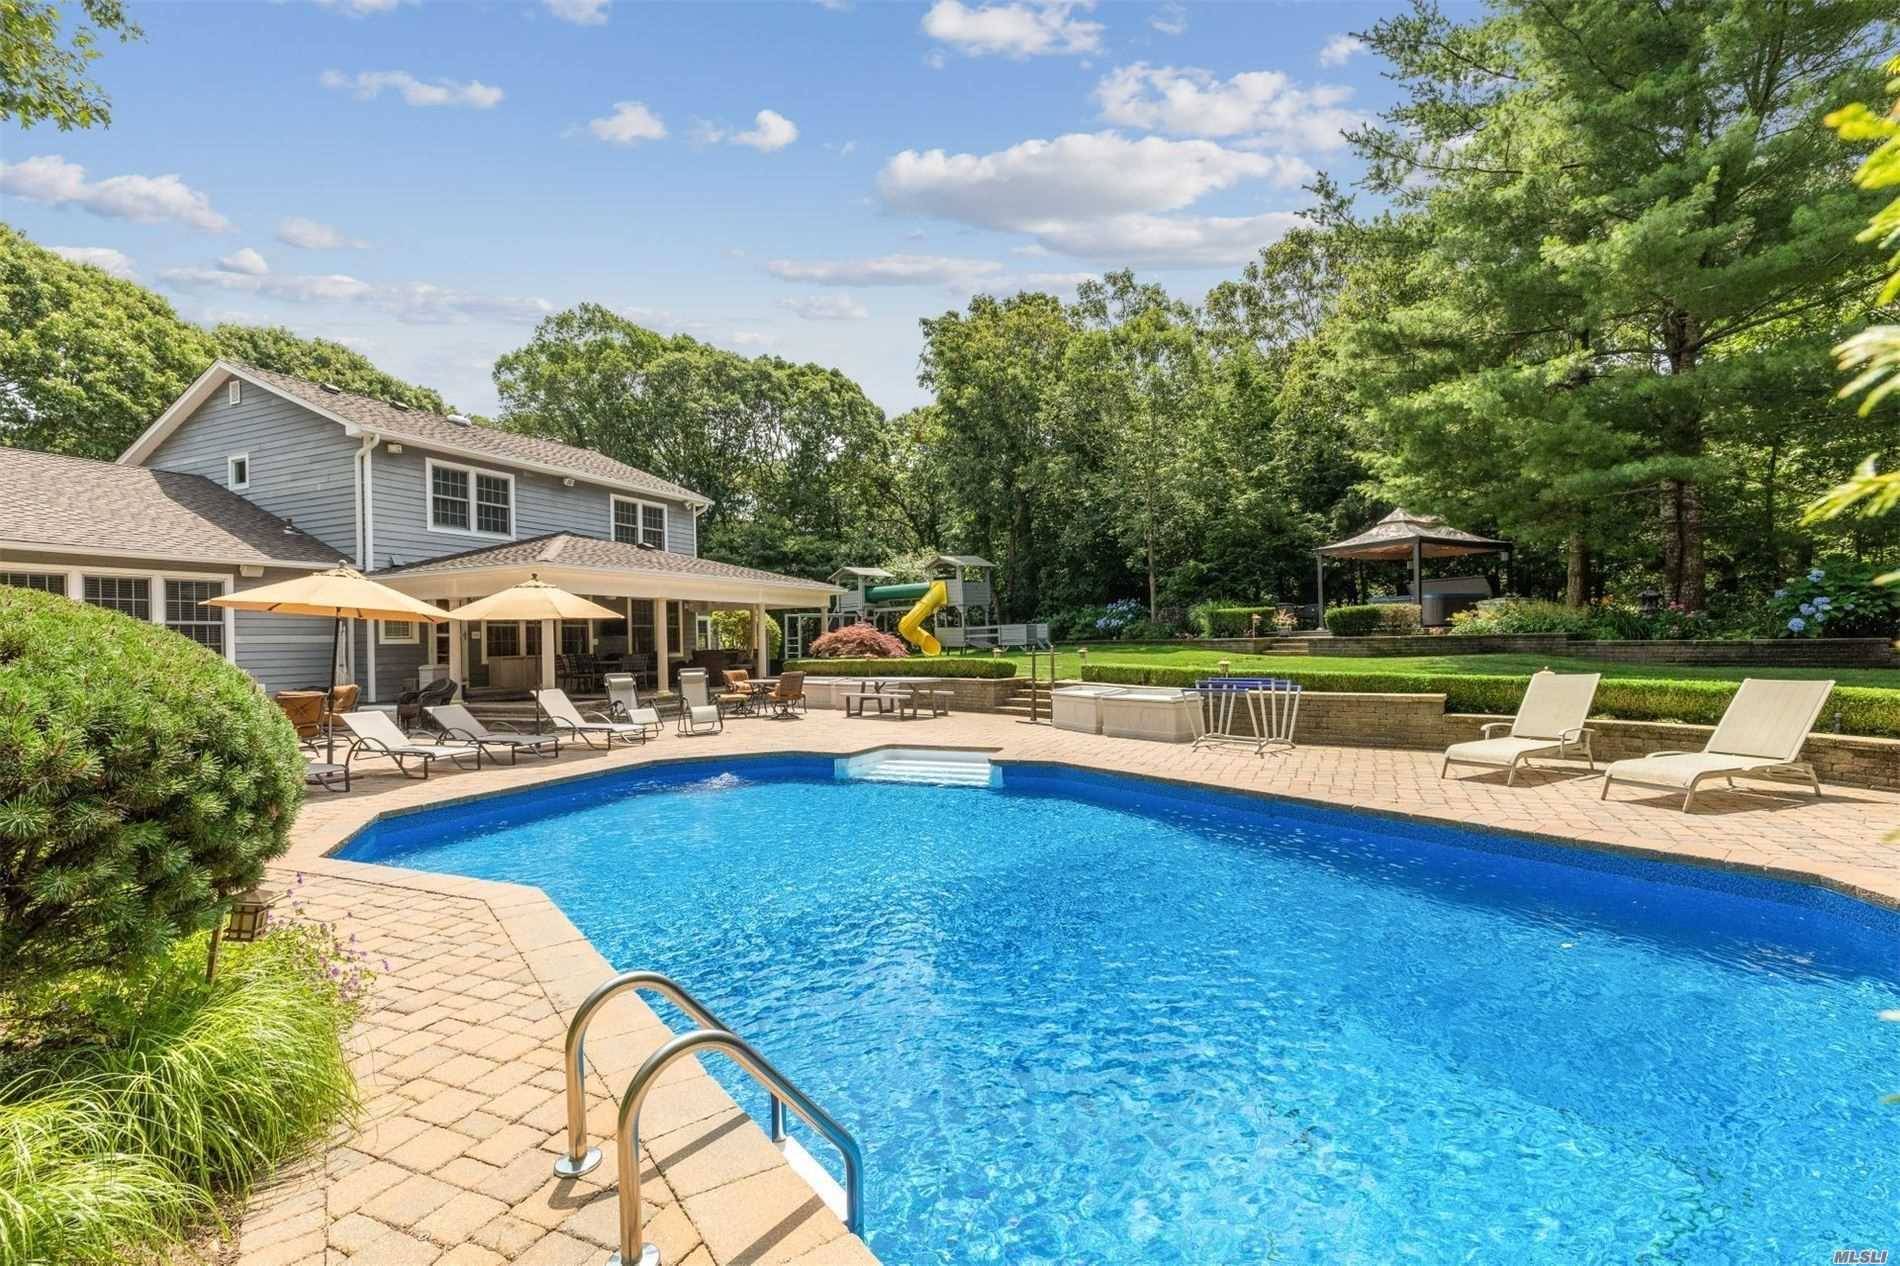 A true Hampton's Retreat your own private oasis complete with heated pool, hot tub, covered porches and pavilion surrounded by an estate like setting will take your breath away.